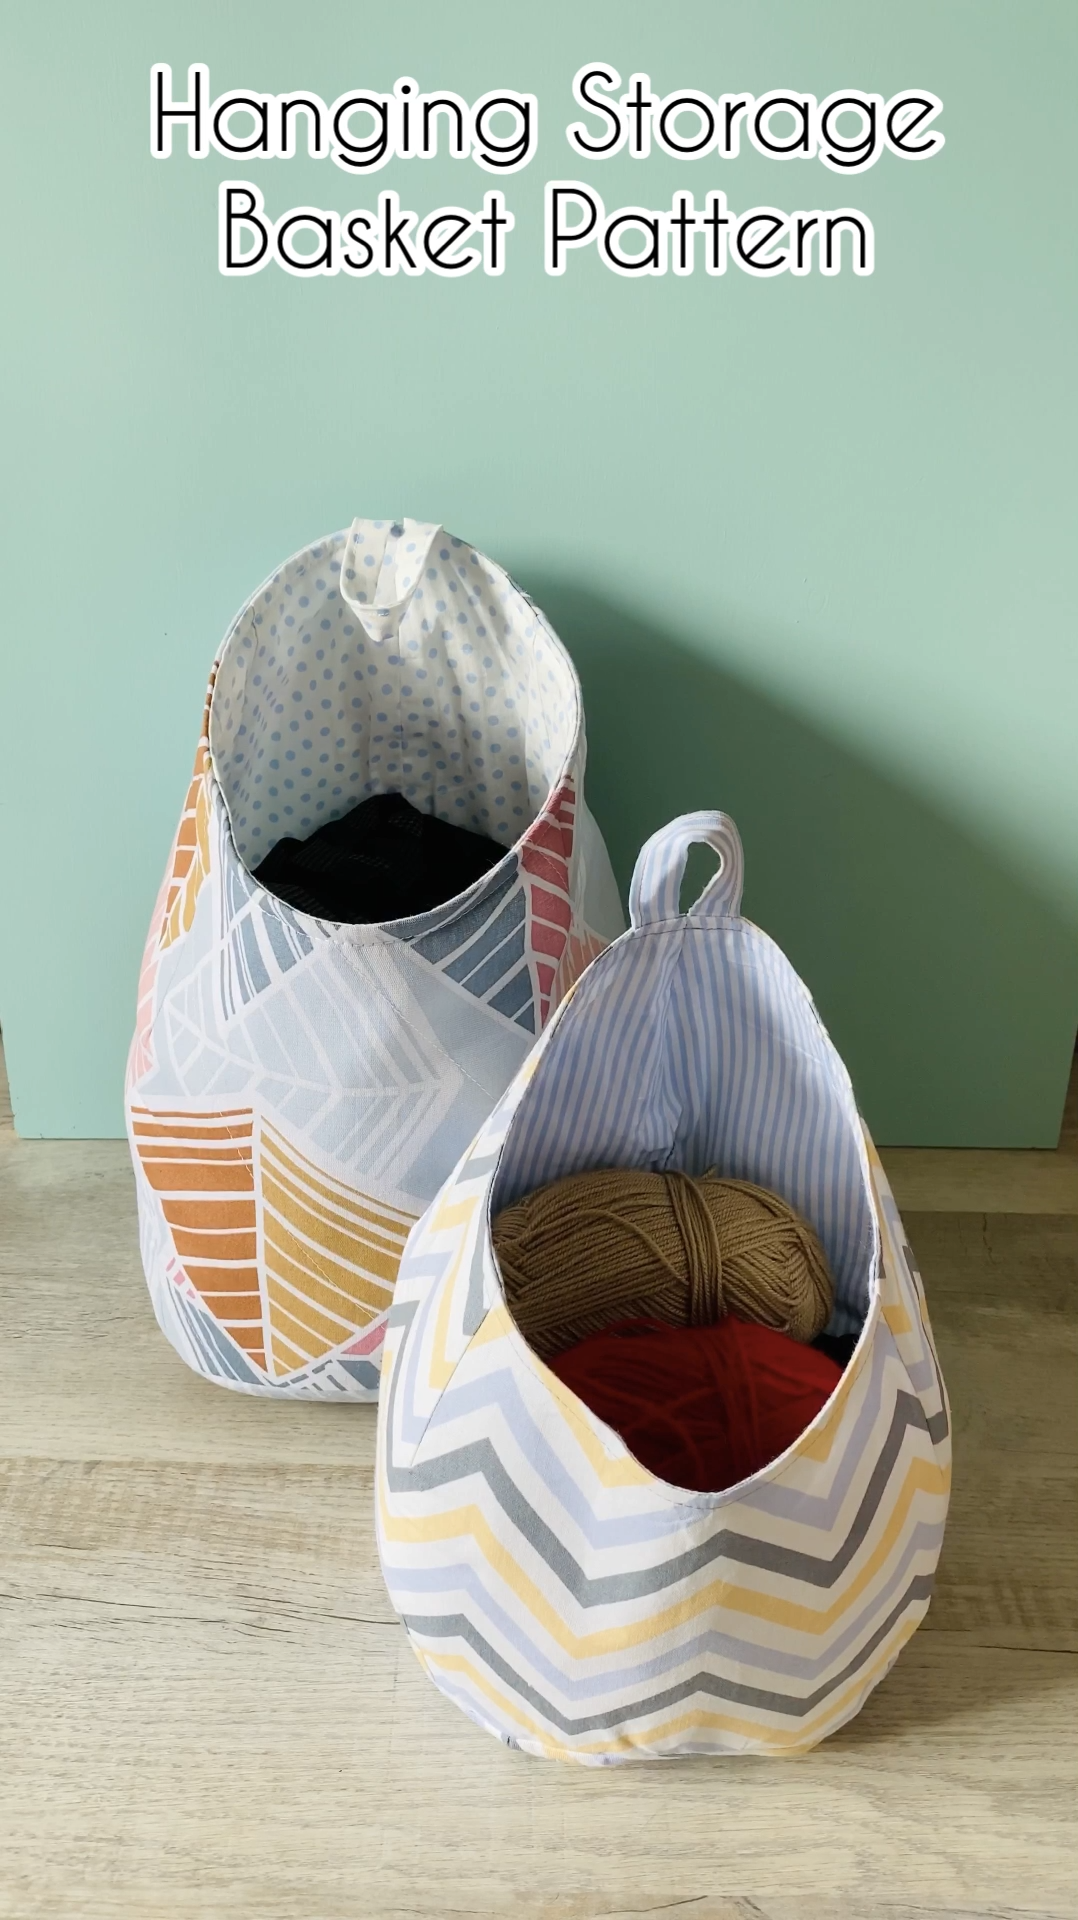 Hanging Storage Basket PATTERN, Wall Basket Small Basket +Medium, easy sewing project for Beginner - Hanging Storage Basket PATTERN, Wall Basket Small Basket +Medium, easy sewing project for Beginner -   19 fabric crafts no sew scrap ideas